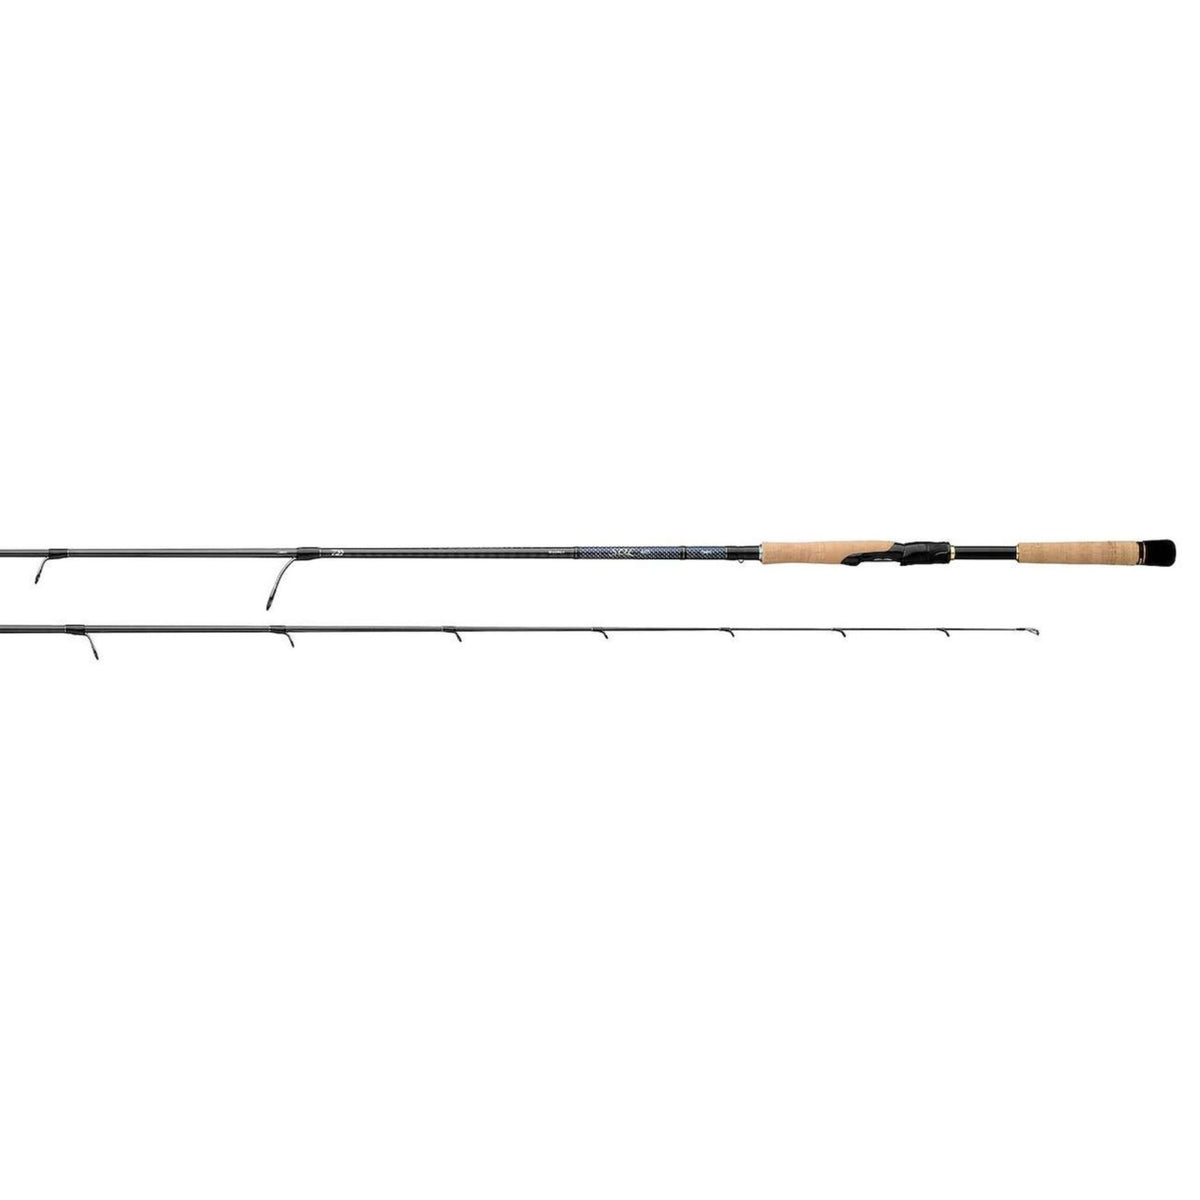 Daiwa Sol AGS Inshore Spinning Rod - SOLAGS70MFS